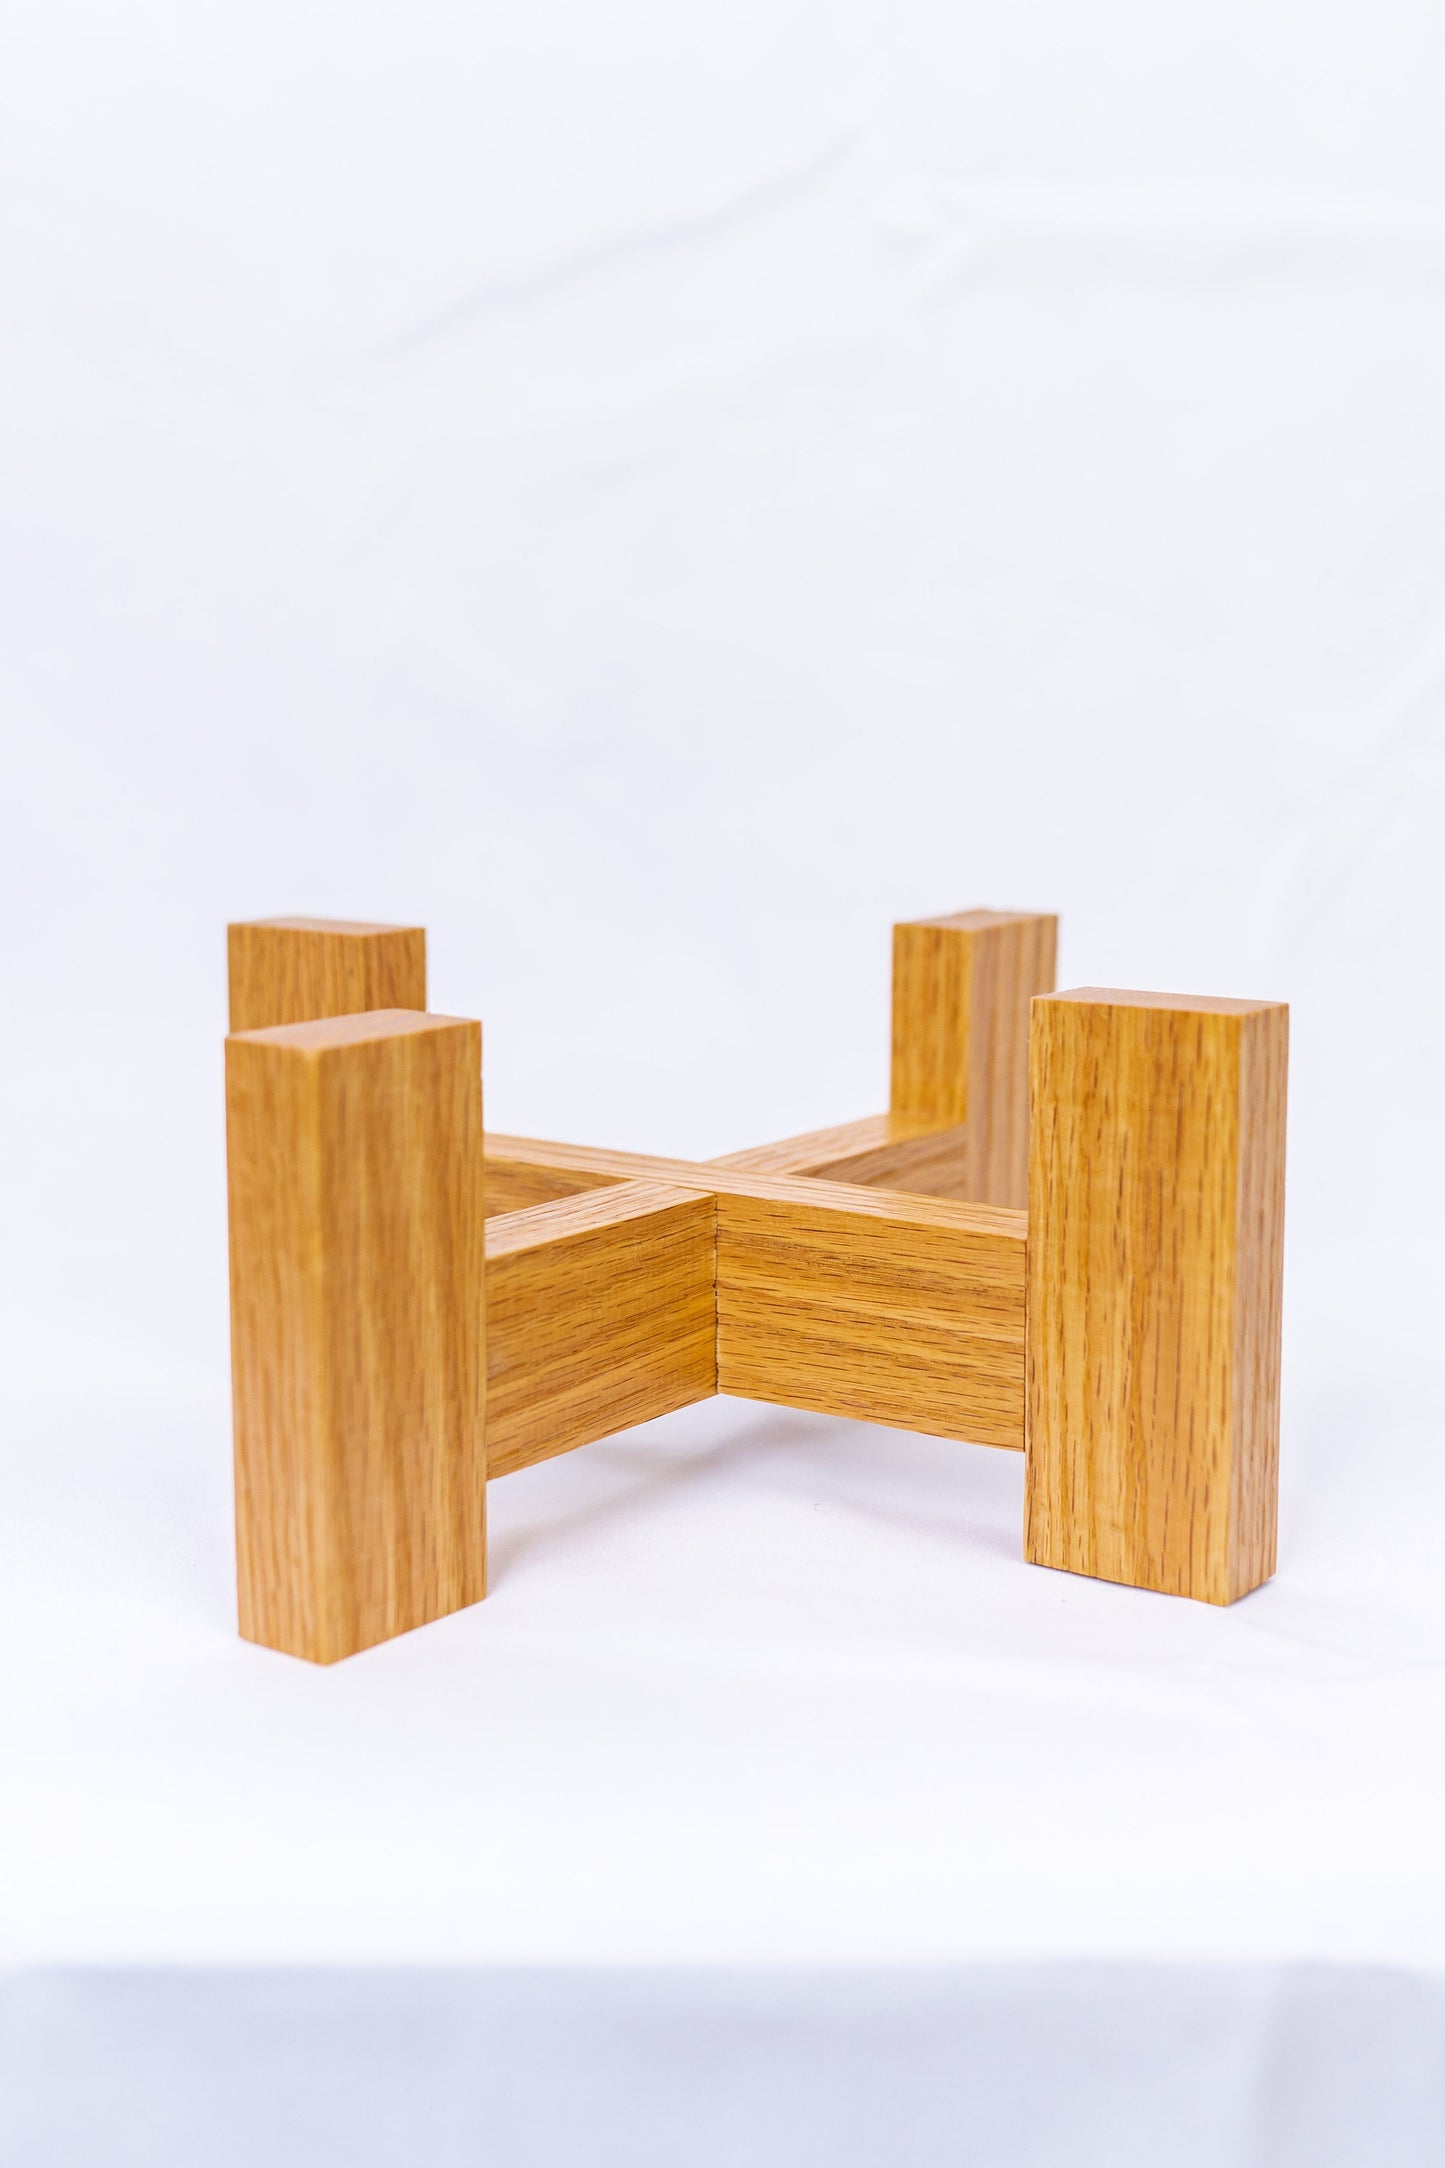 'Red Oak' Wood Plant Stand